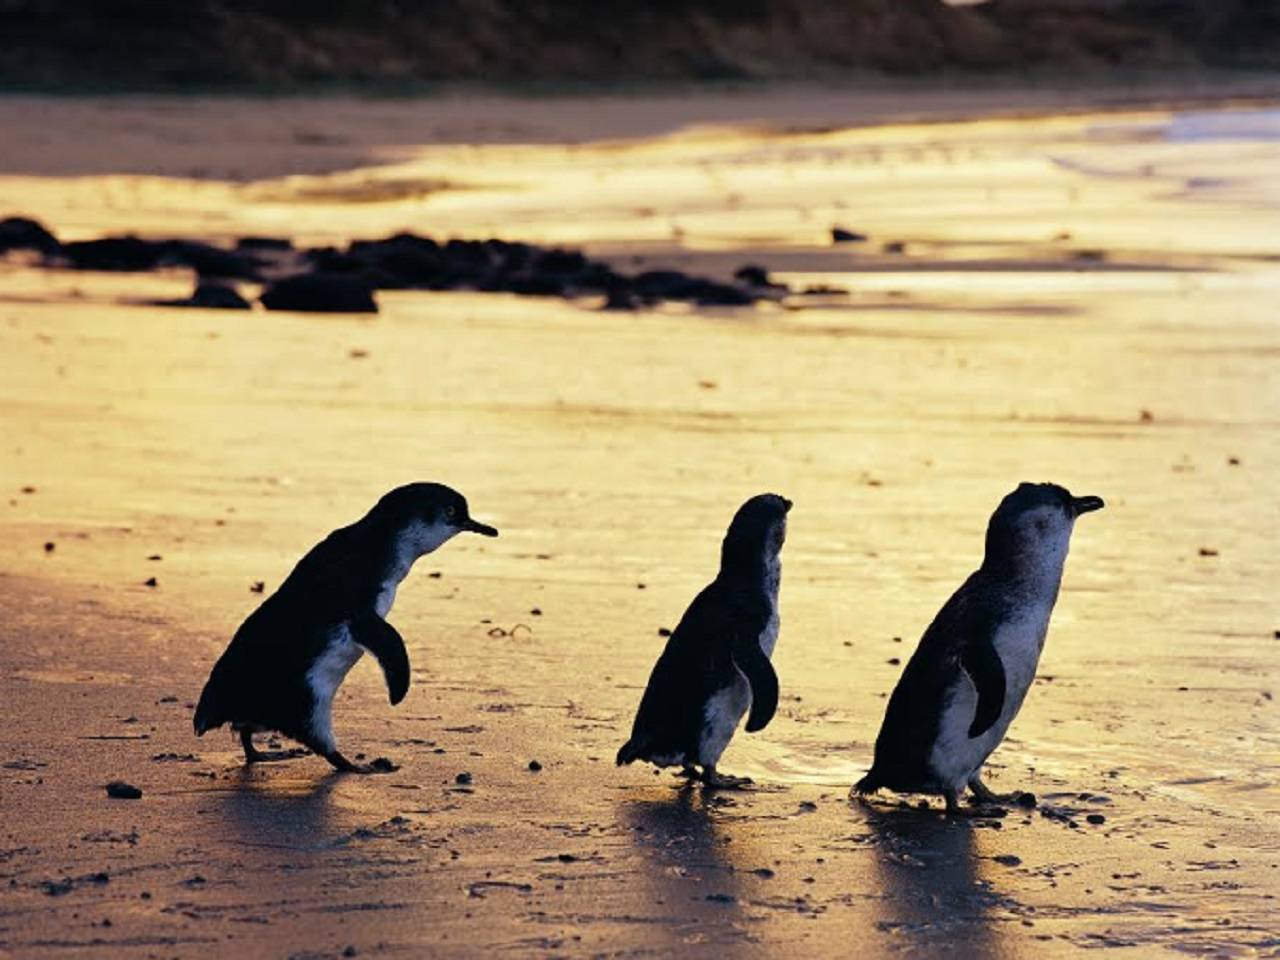 Phillip Island Penguin Parade live streamed to the world